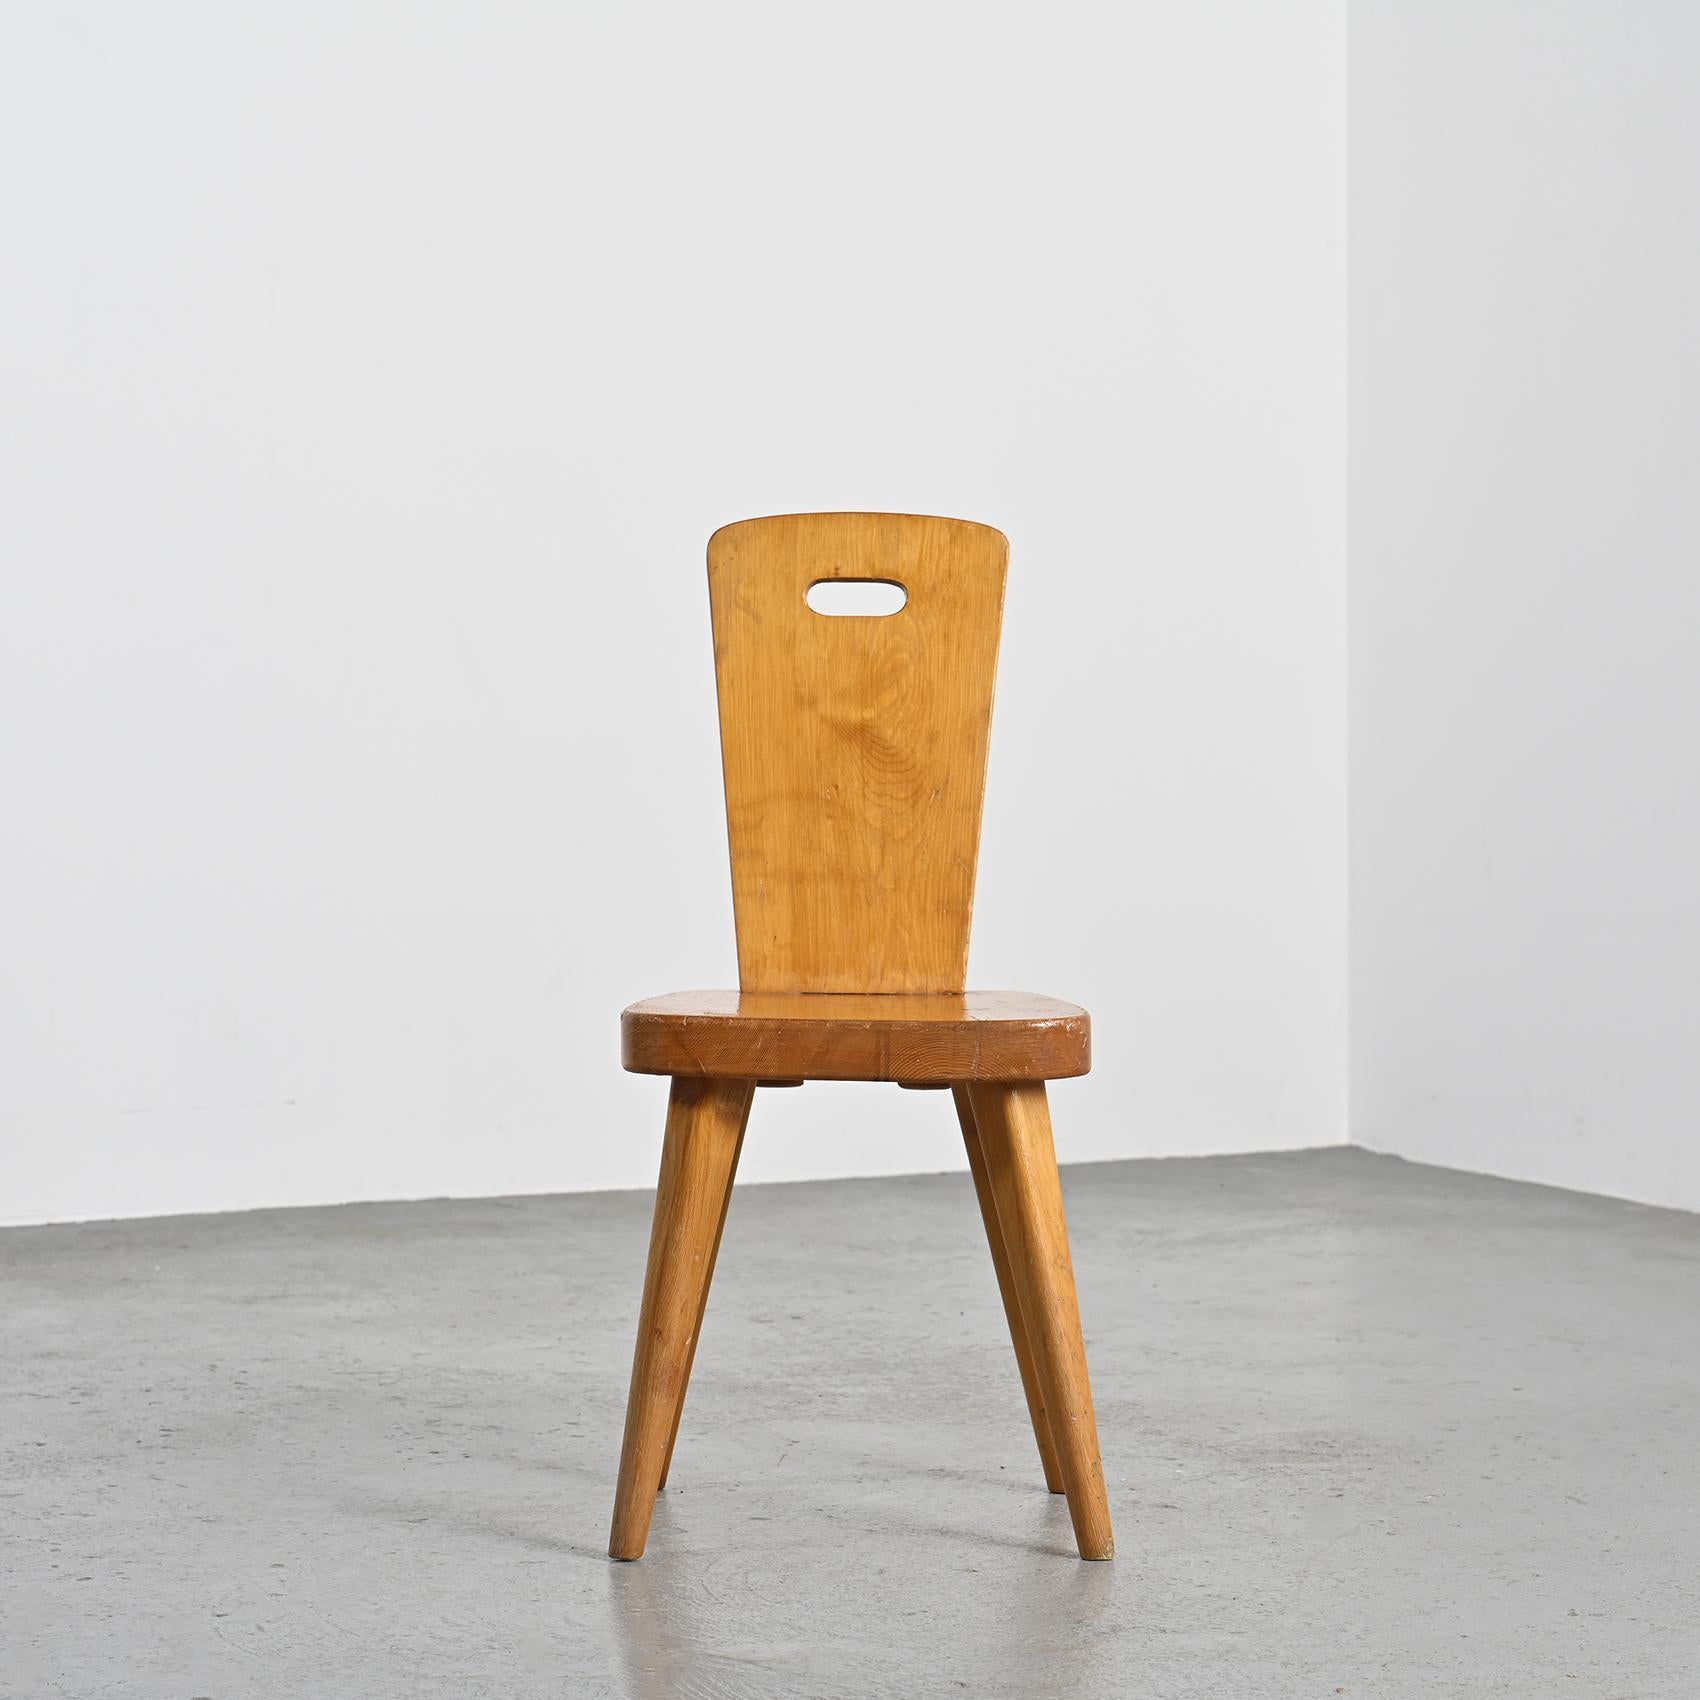 
Chair designed by Christian Durupt, a celebrated French cabinetmaker known for his partnership with Charlotte Perriand.

Crafted from solid pine, prized for its sturdy nature, it stands on four elegantly tapered legs supporting a generously